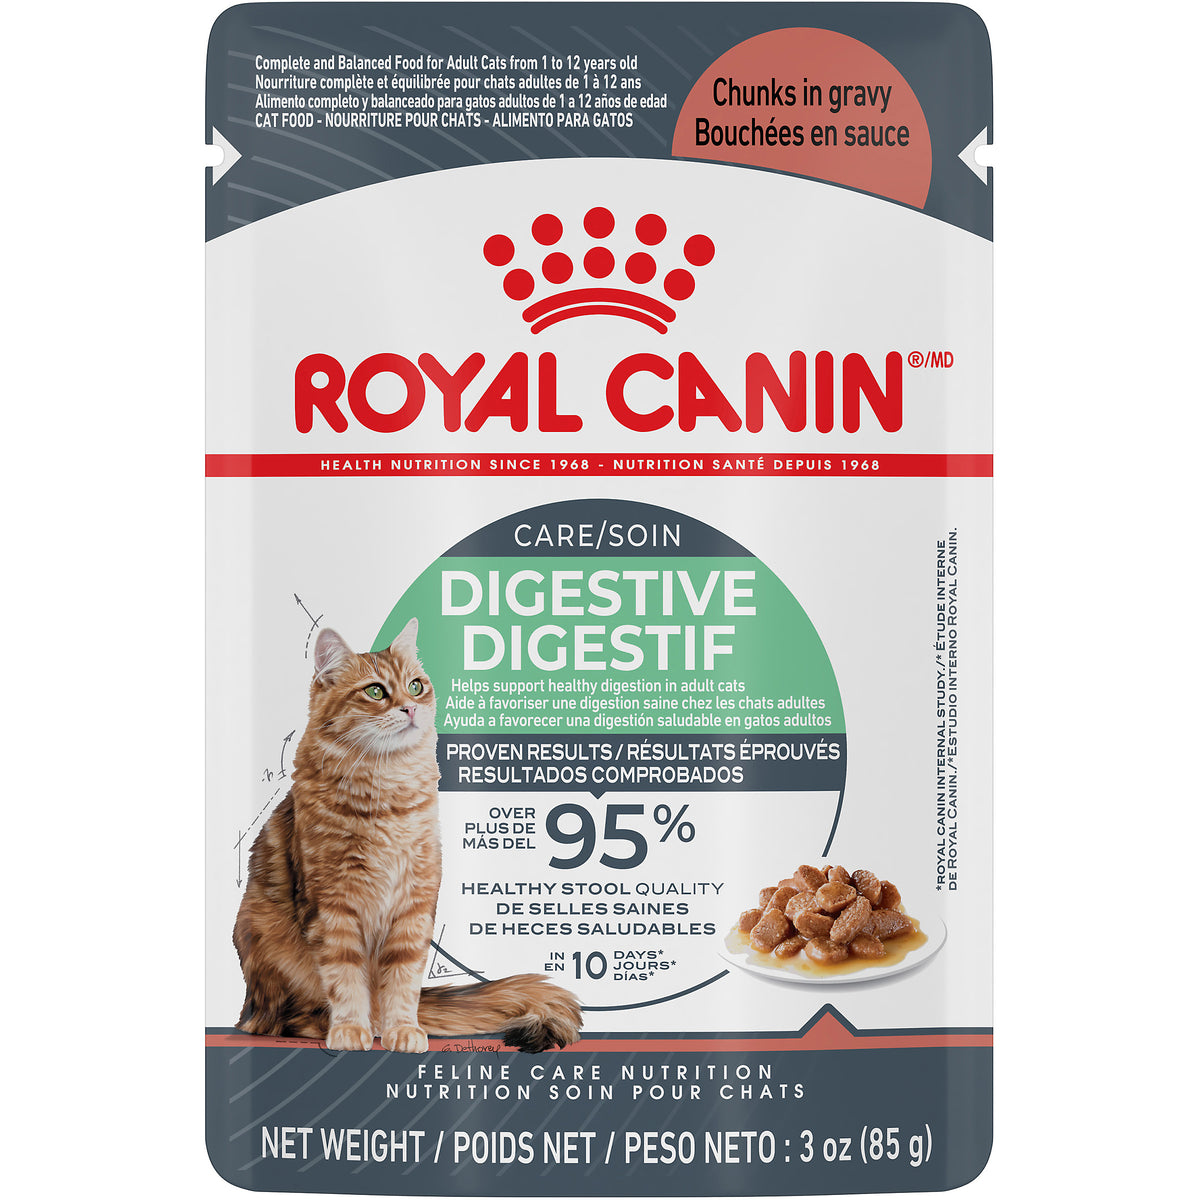 Royal Canin Digest Sensitive Care - Pouch Cat Food (85g)